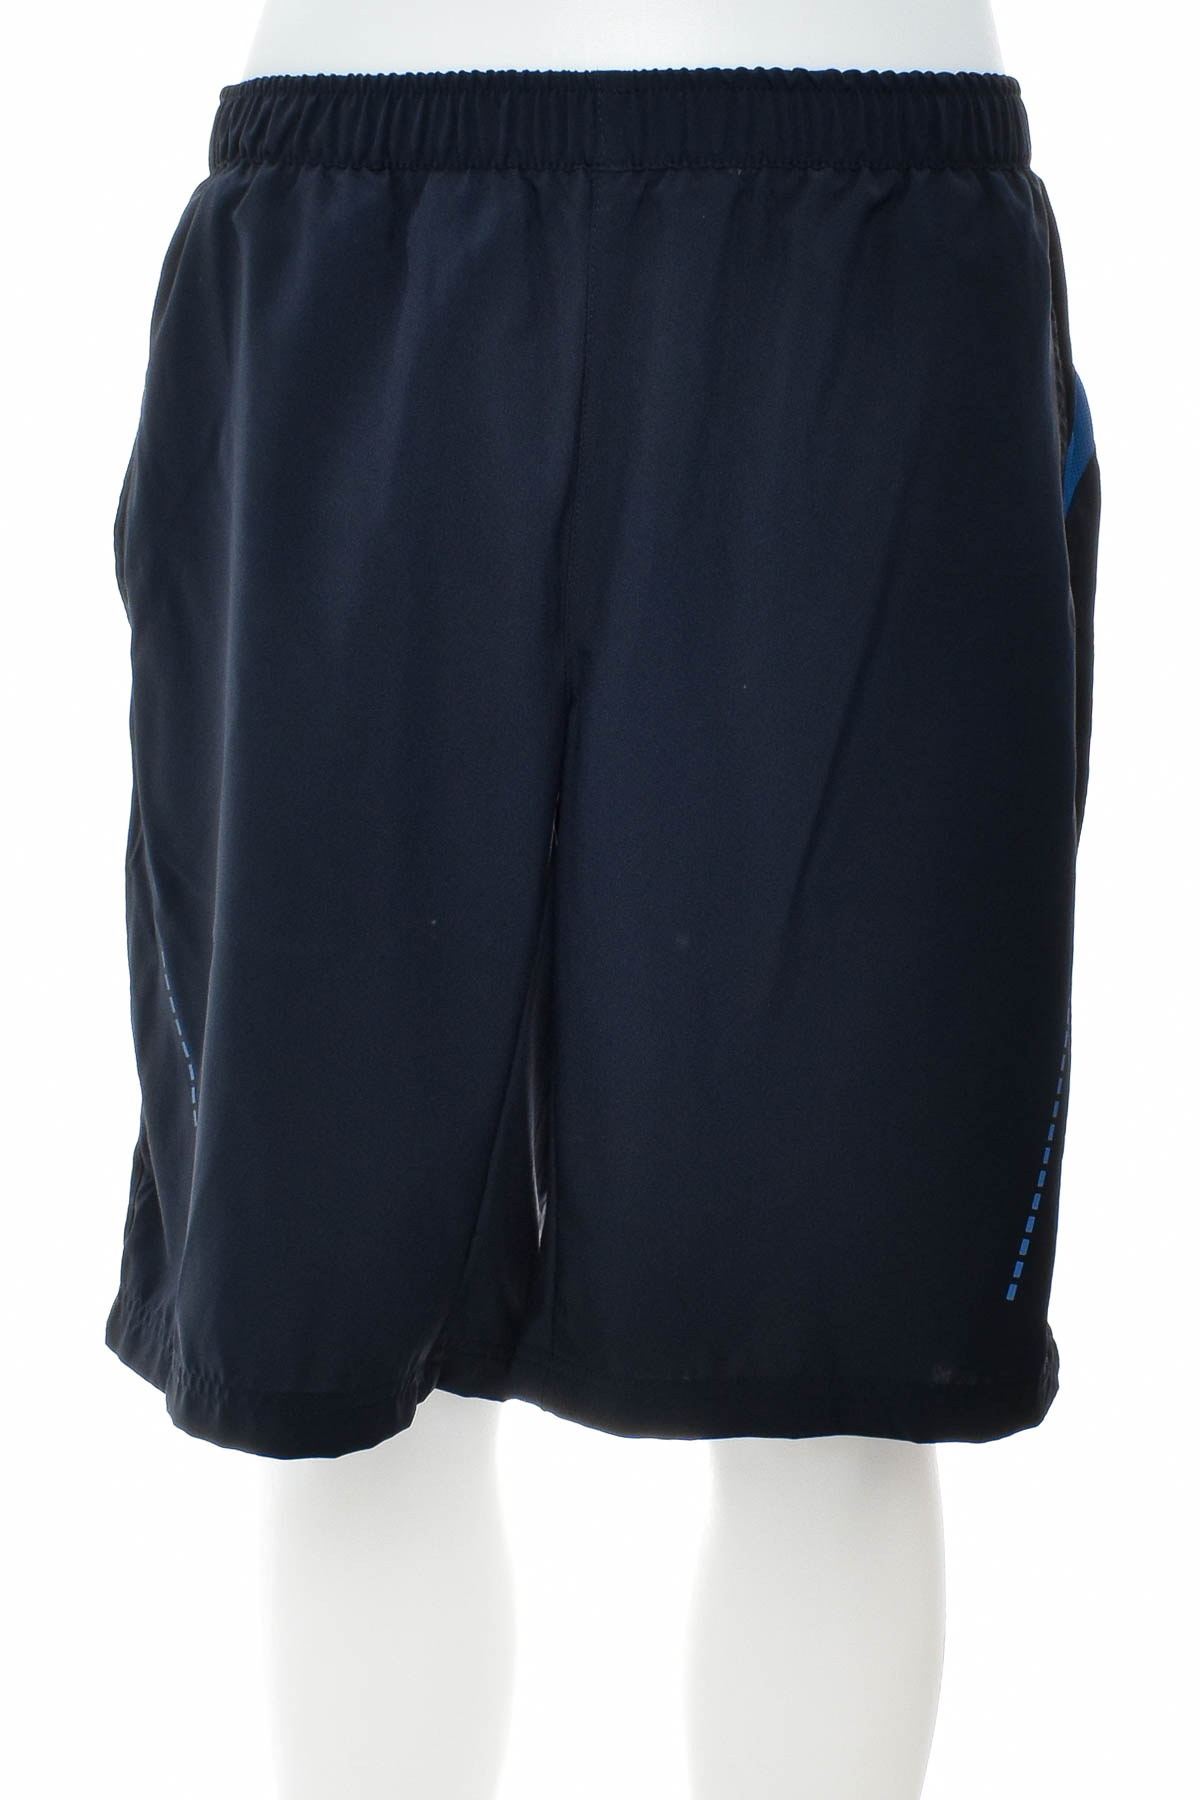 Men's shorts - Active LIMITED by Tchibo - 0